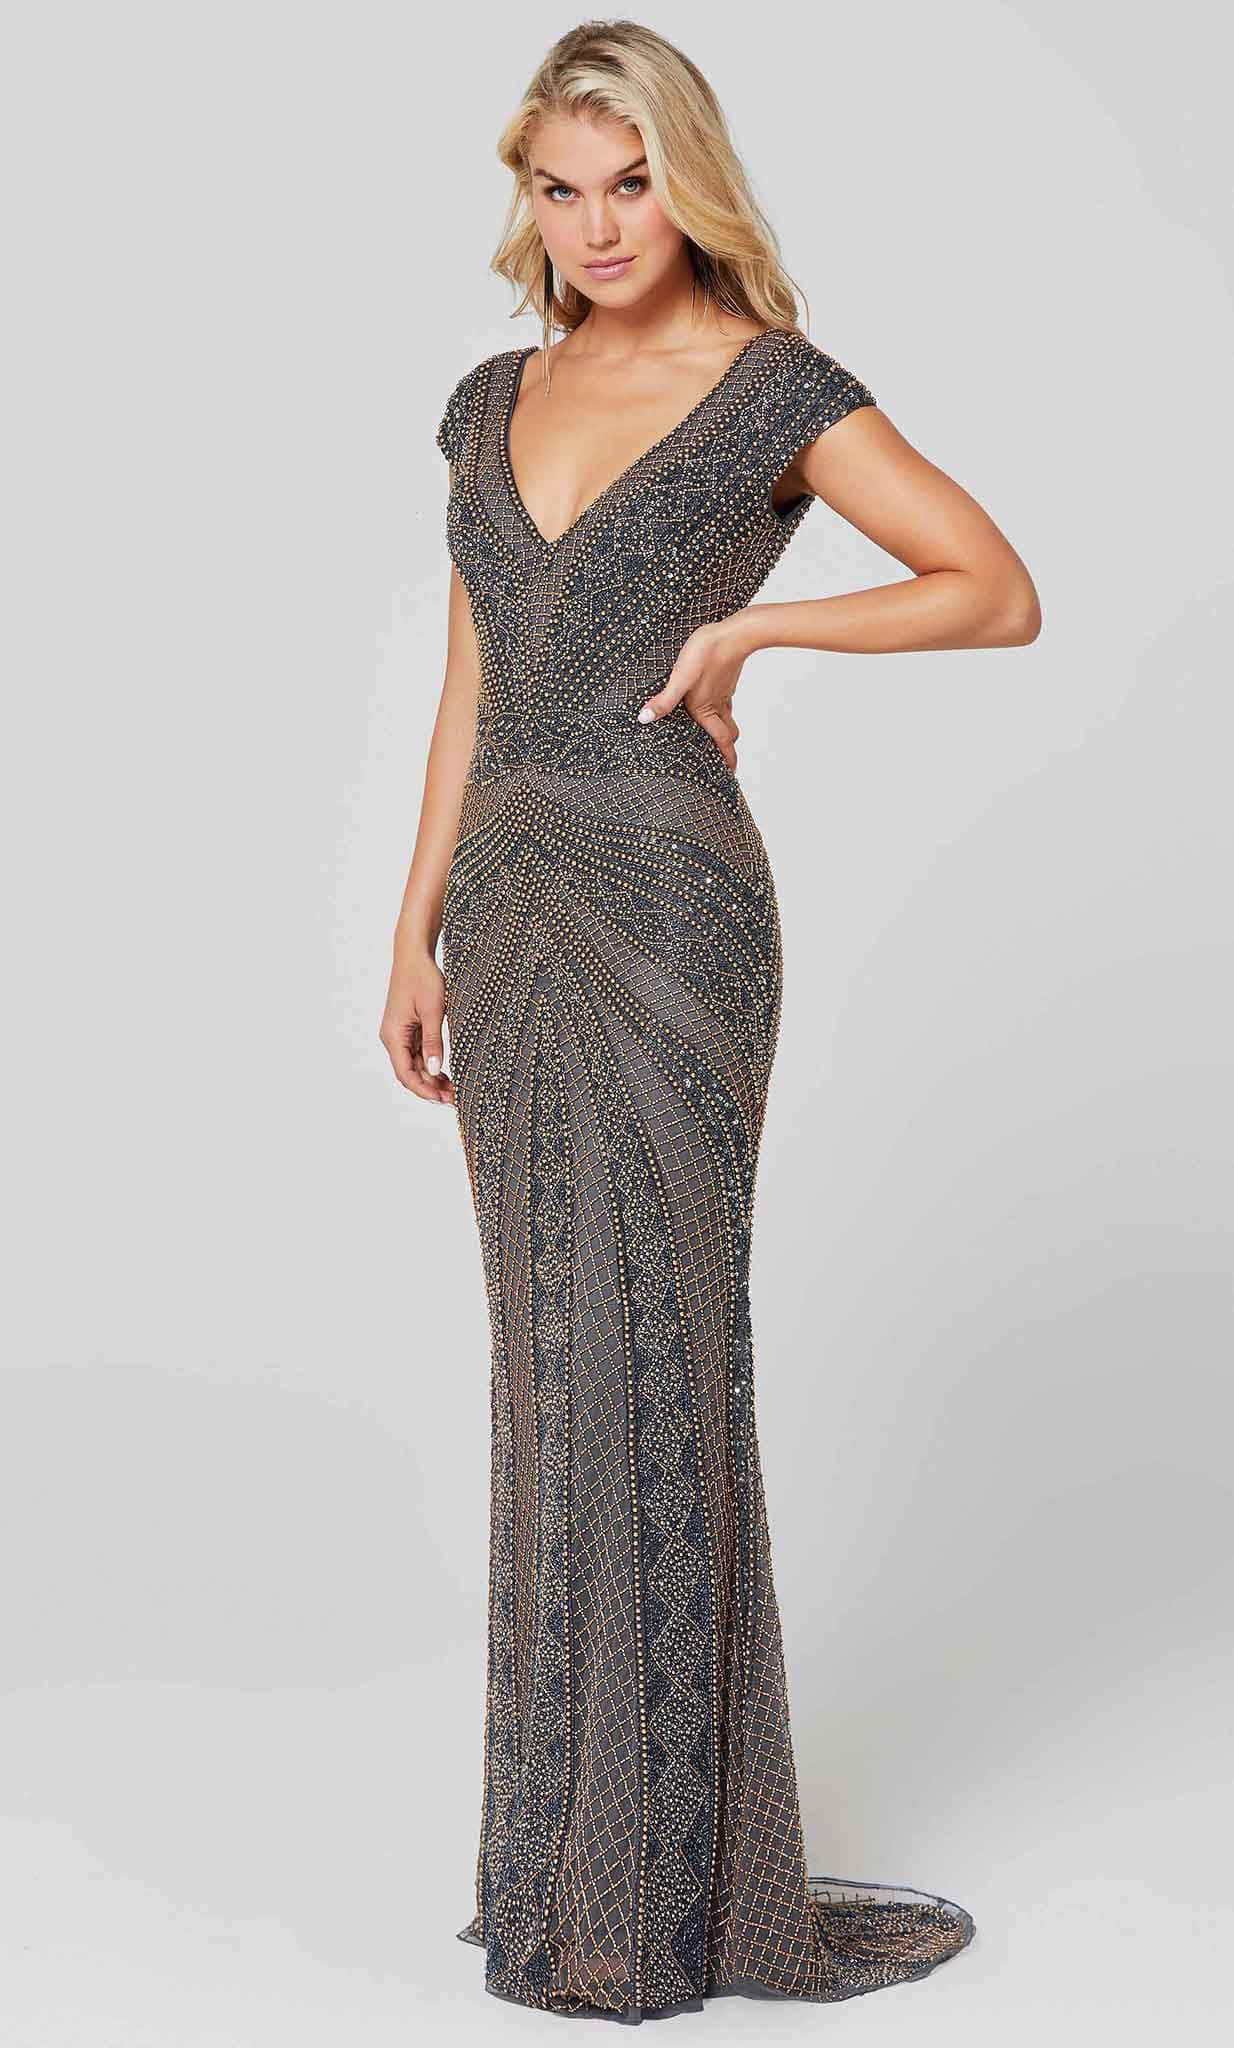 Image of Primavera Couture 3674 - Cap Sleeve Embellished Gown